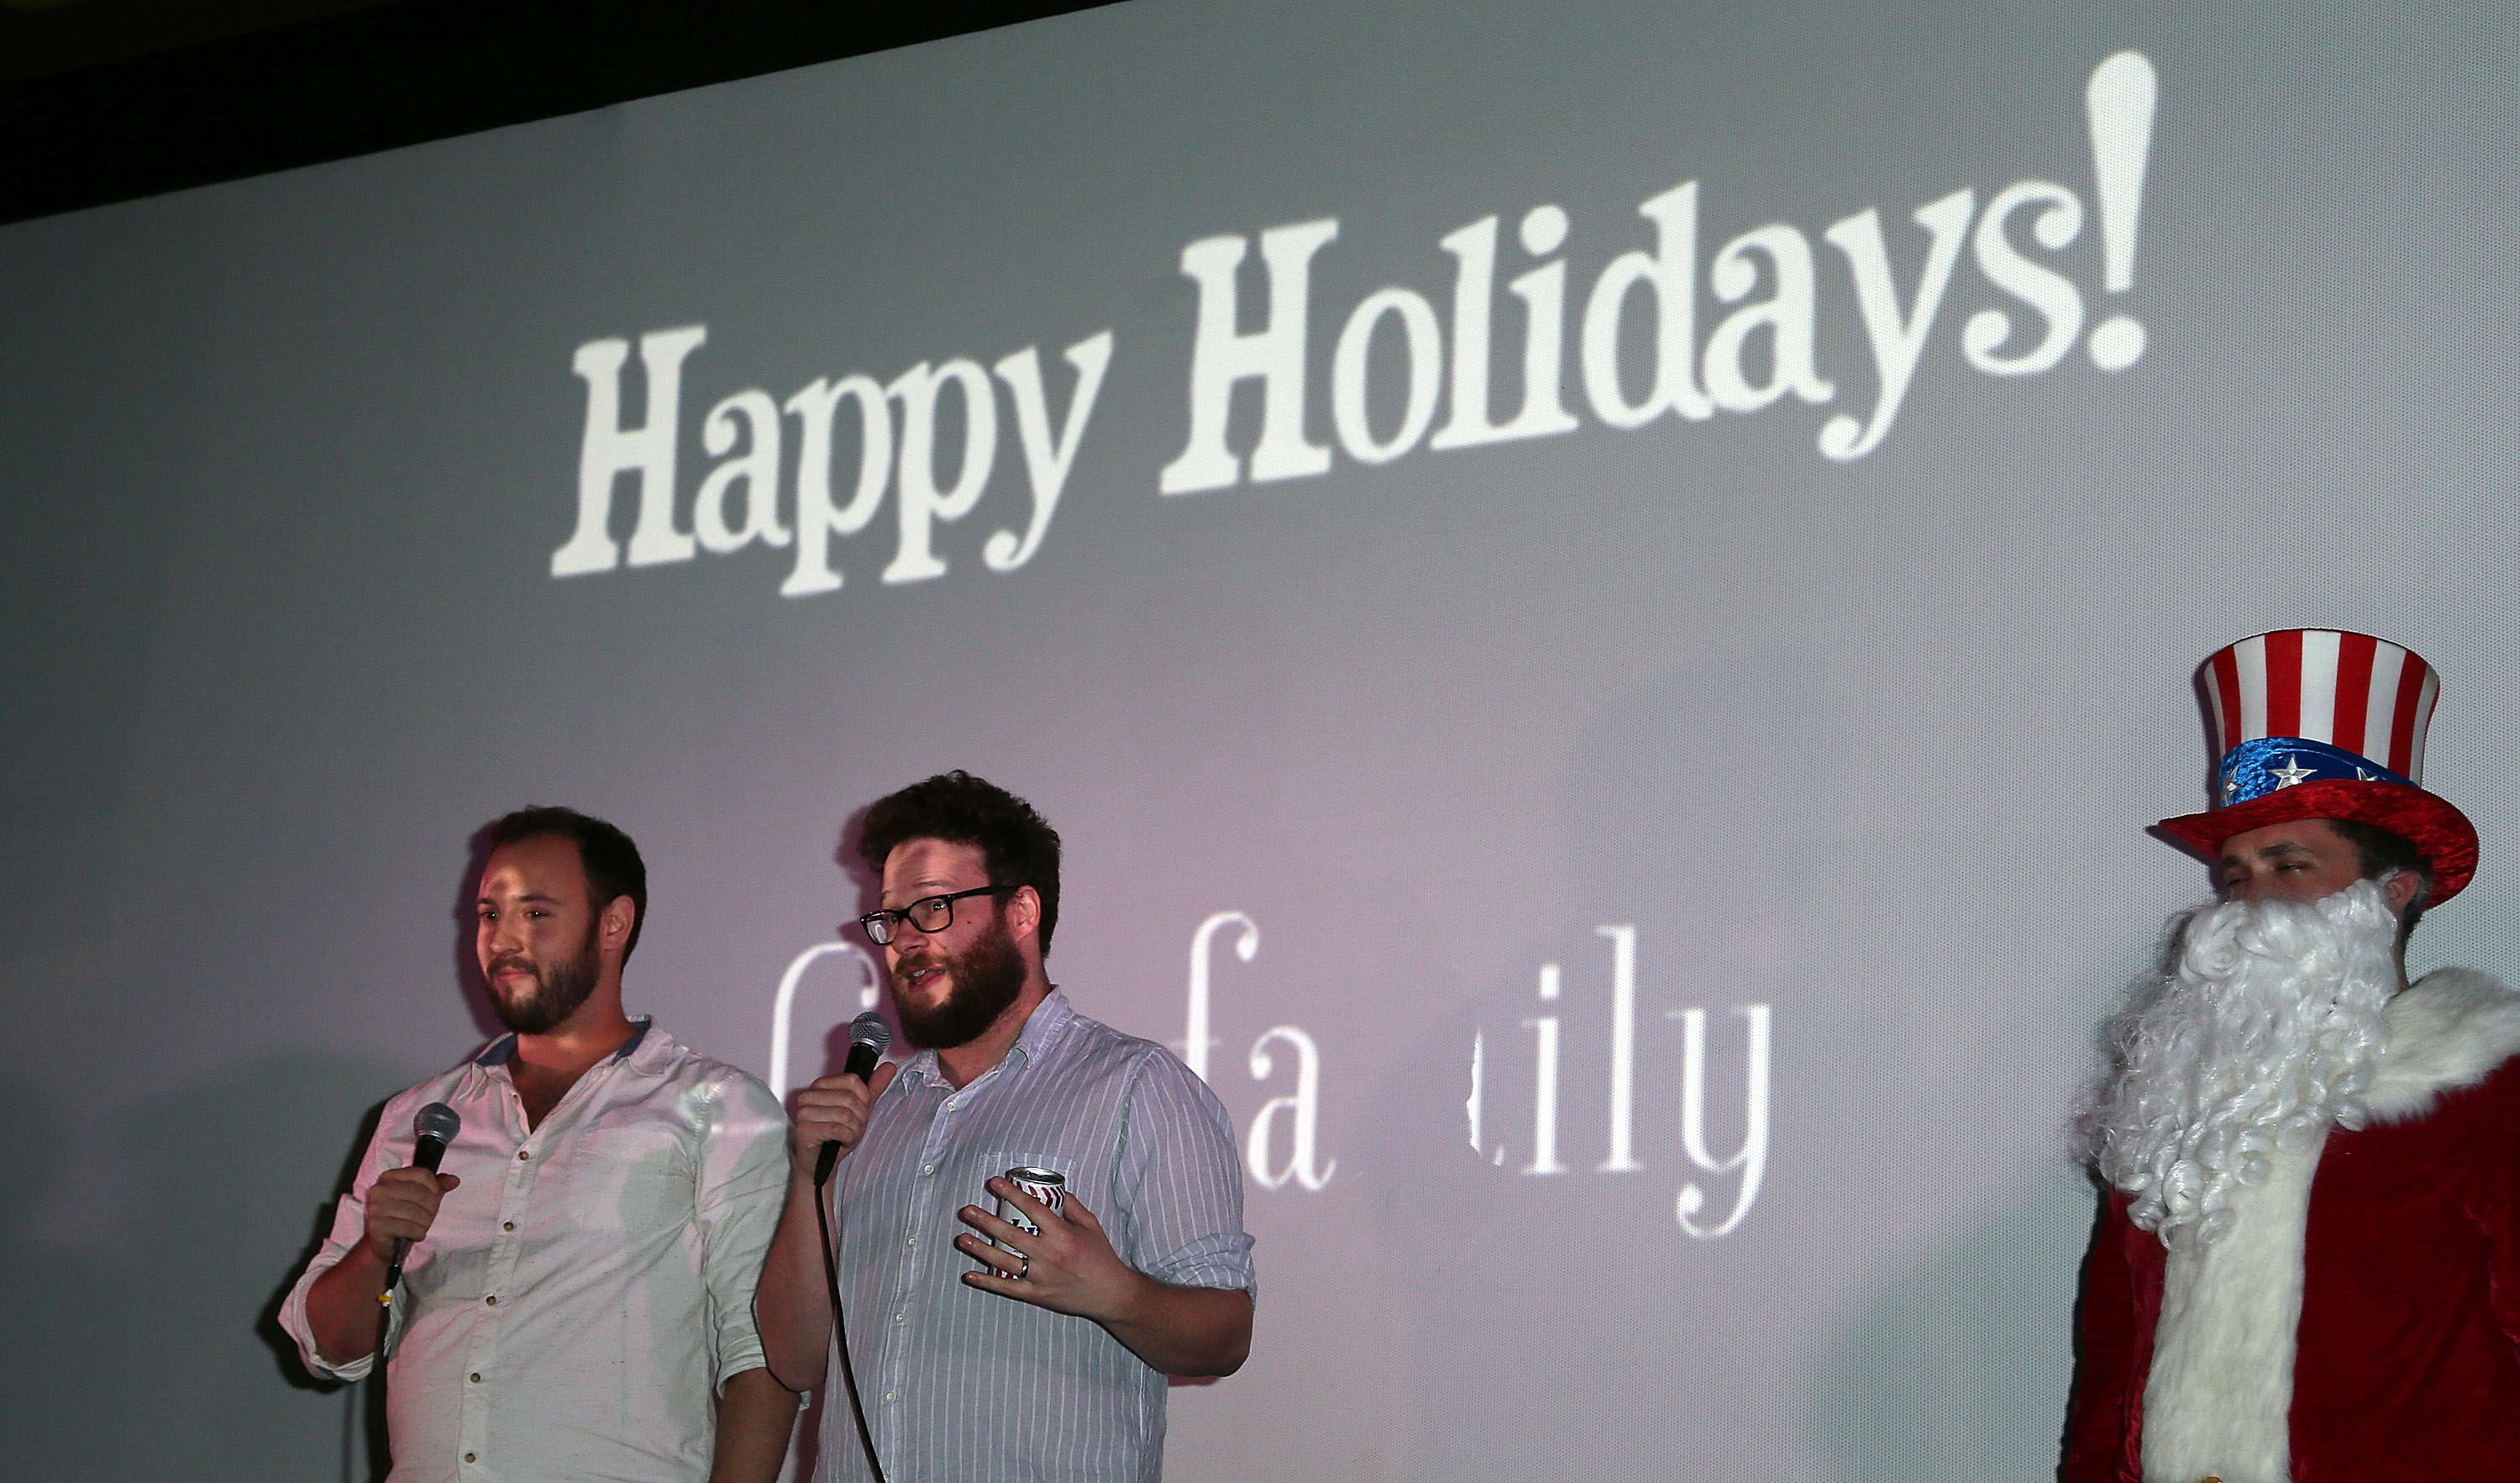 Writers/directors Evan Goldberg (L) and Seth Rogen introduce the screening of Sony Pictures' "The Interview" at Cinefamily on Dec. 25, 2014 in Los Angeles. (David Livingston—Getty Images)